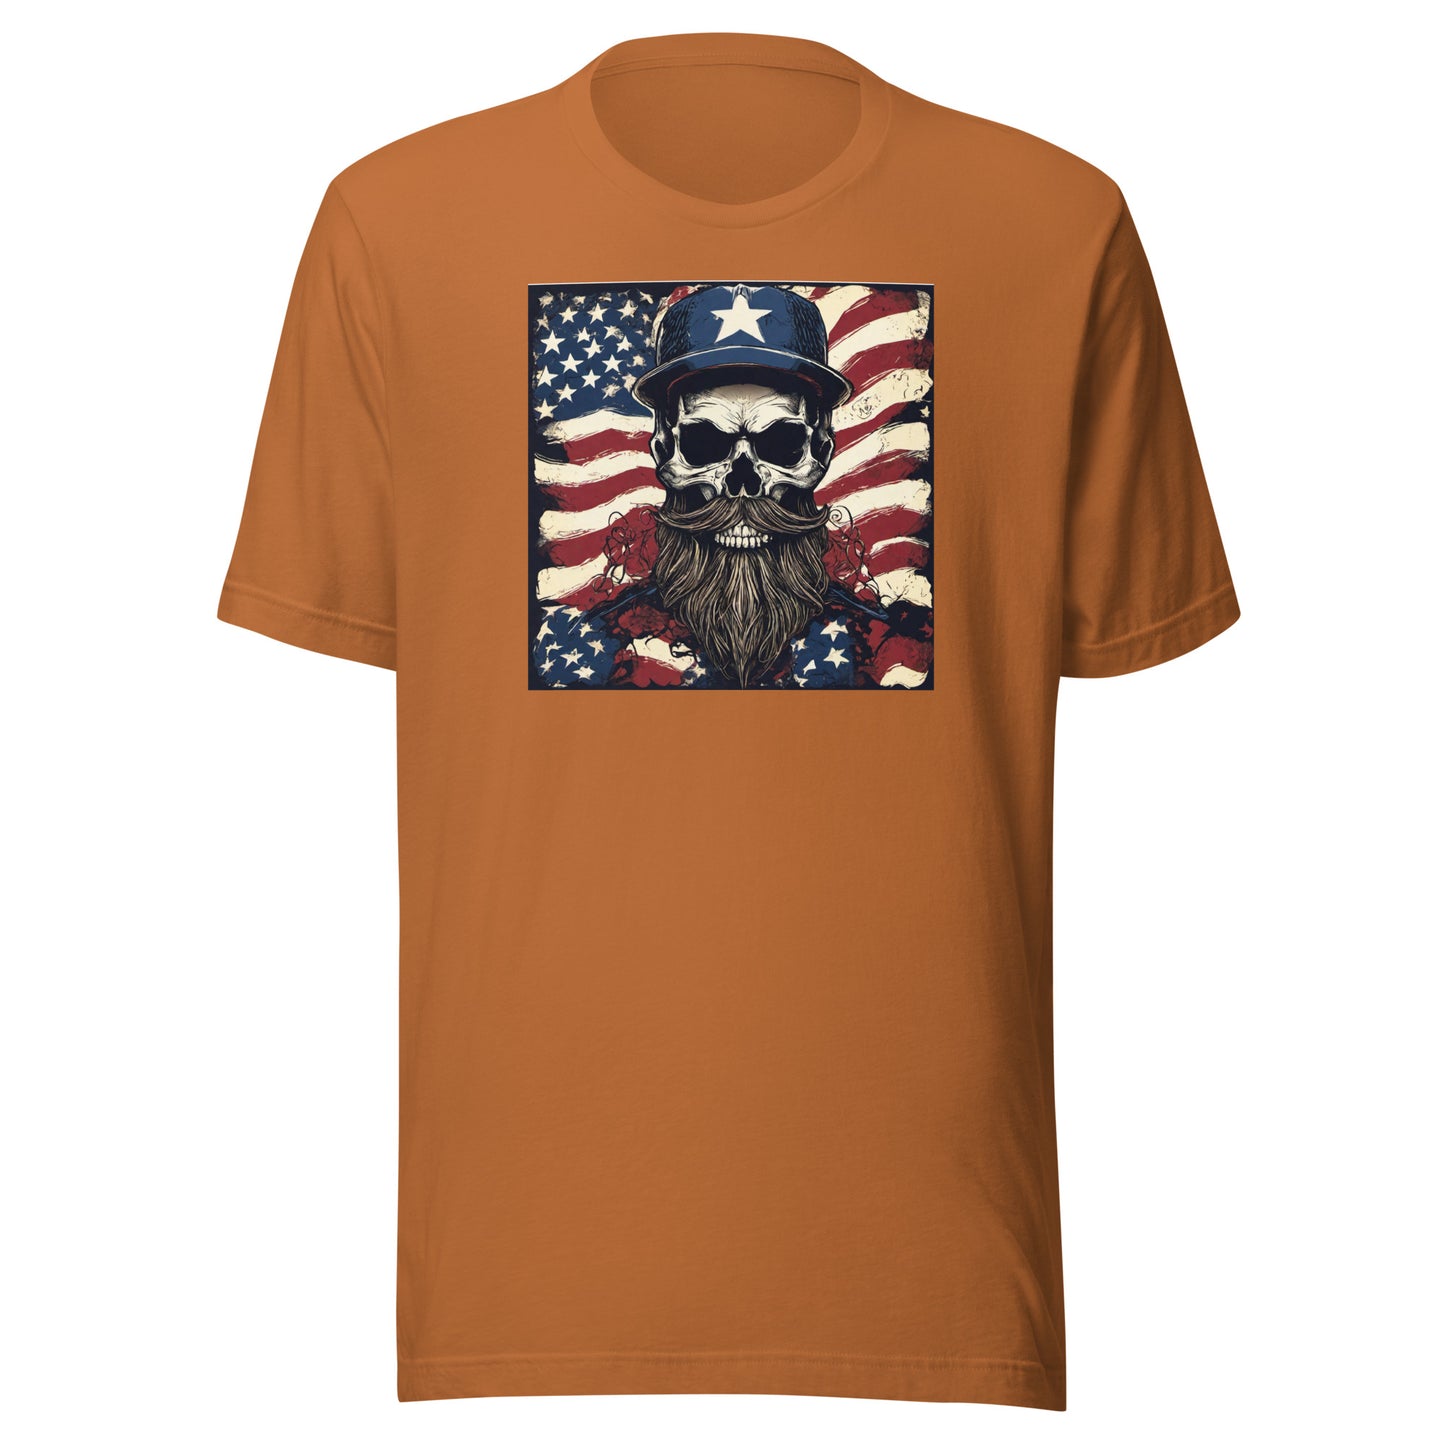 Handsome American Reaper Graphic T-Shirt Toast